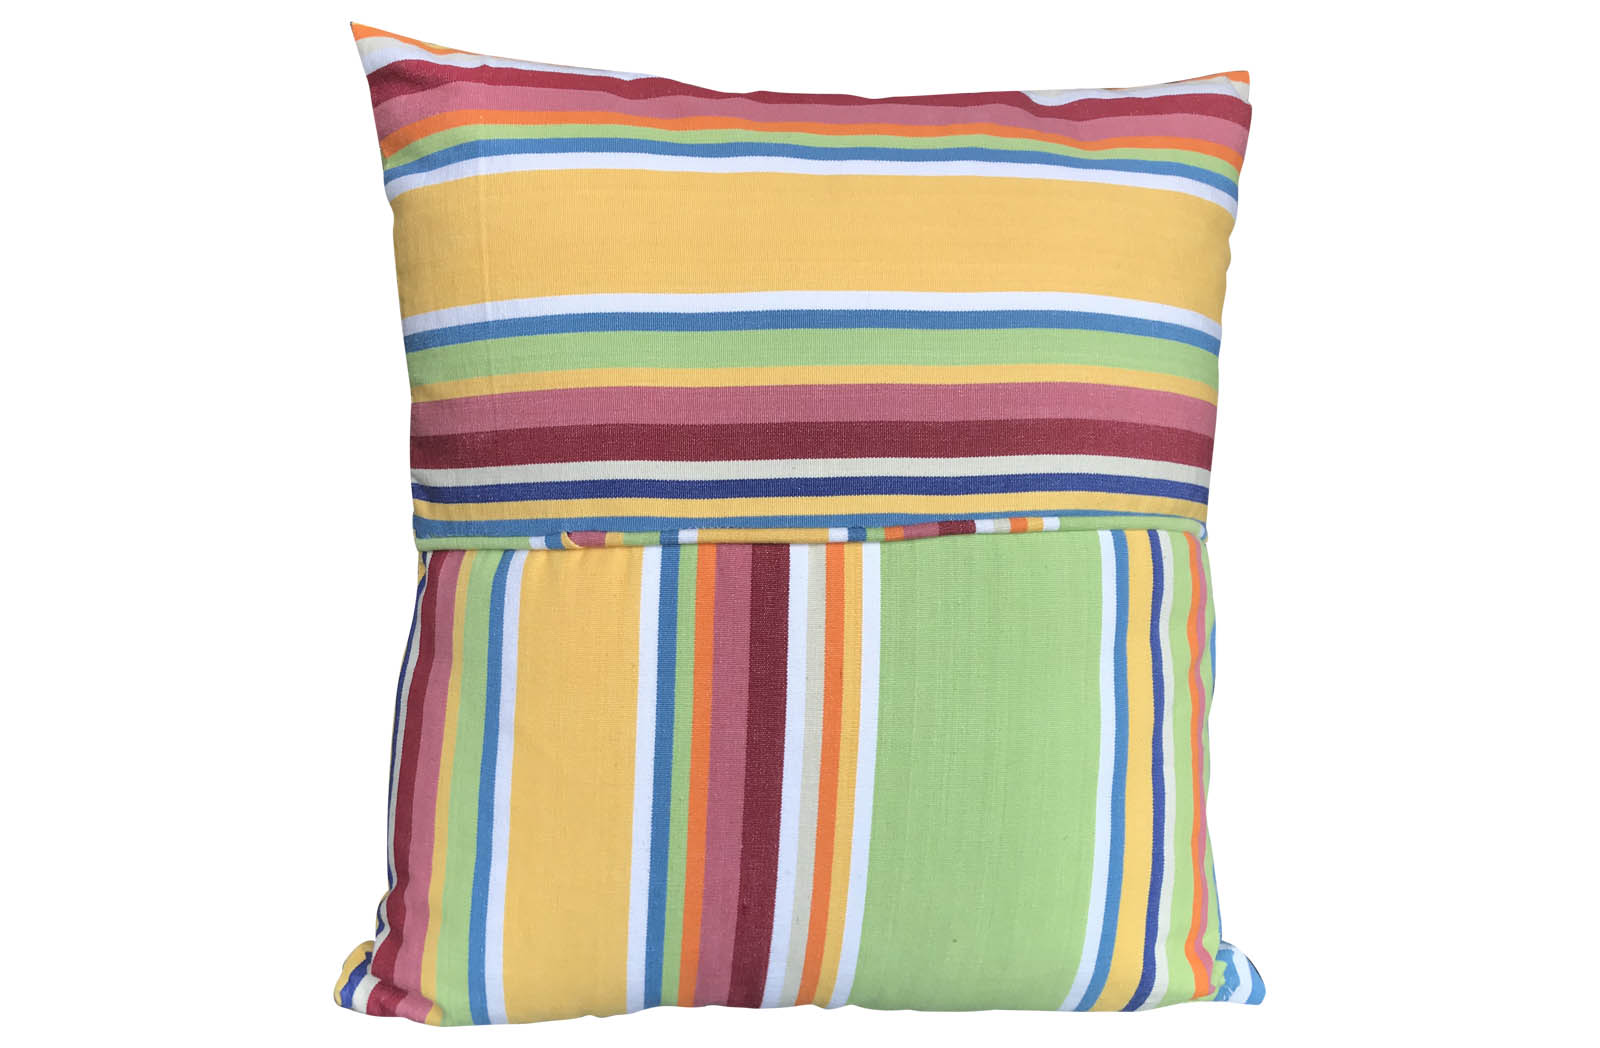 Yellow, Pale Green, Blue Striped Piped Cushions | Square Piped Cushions 